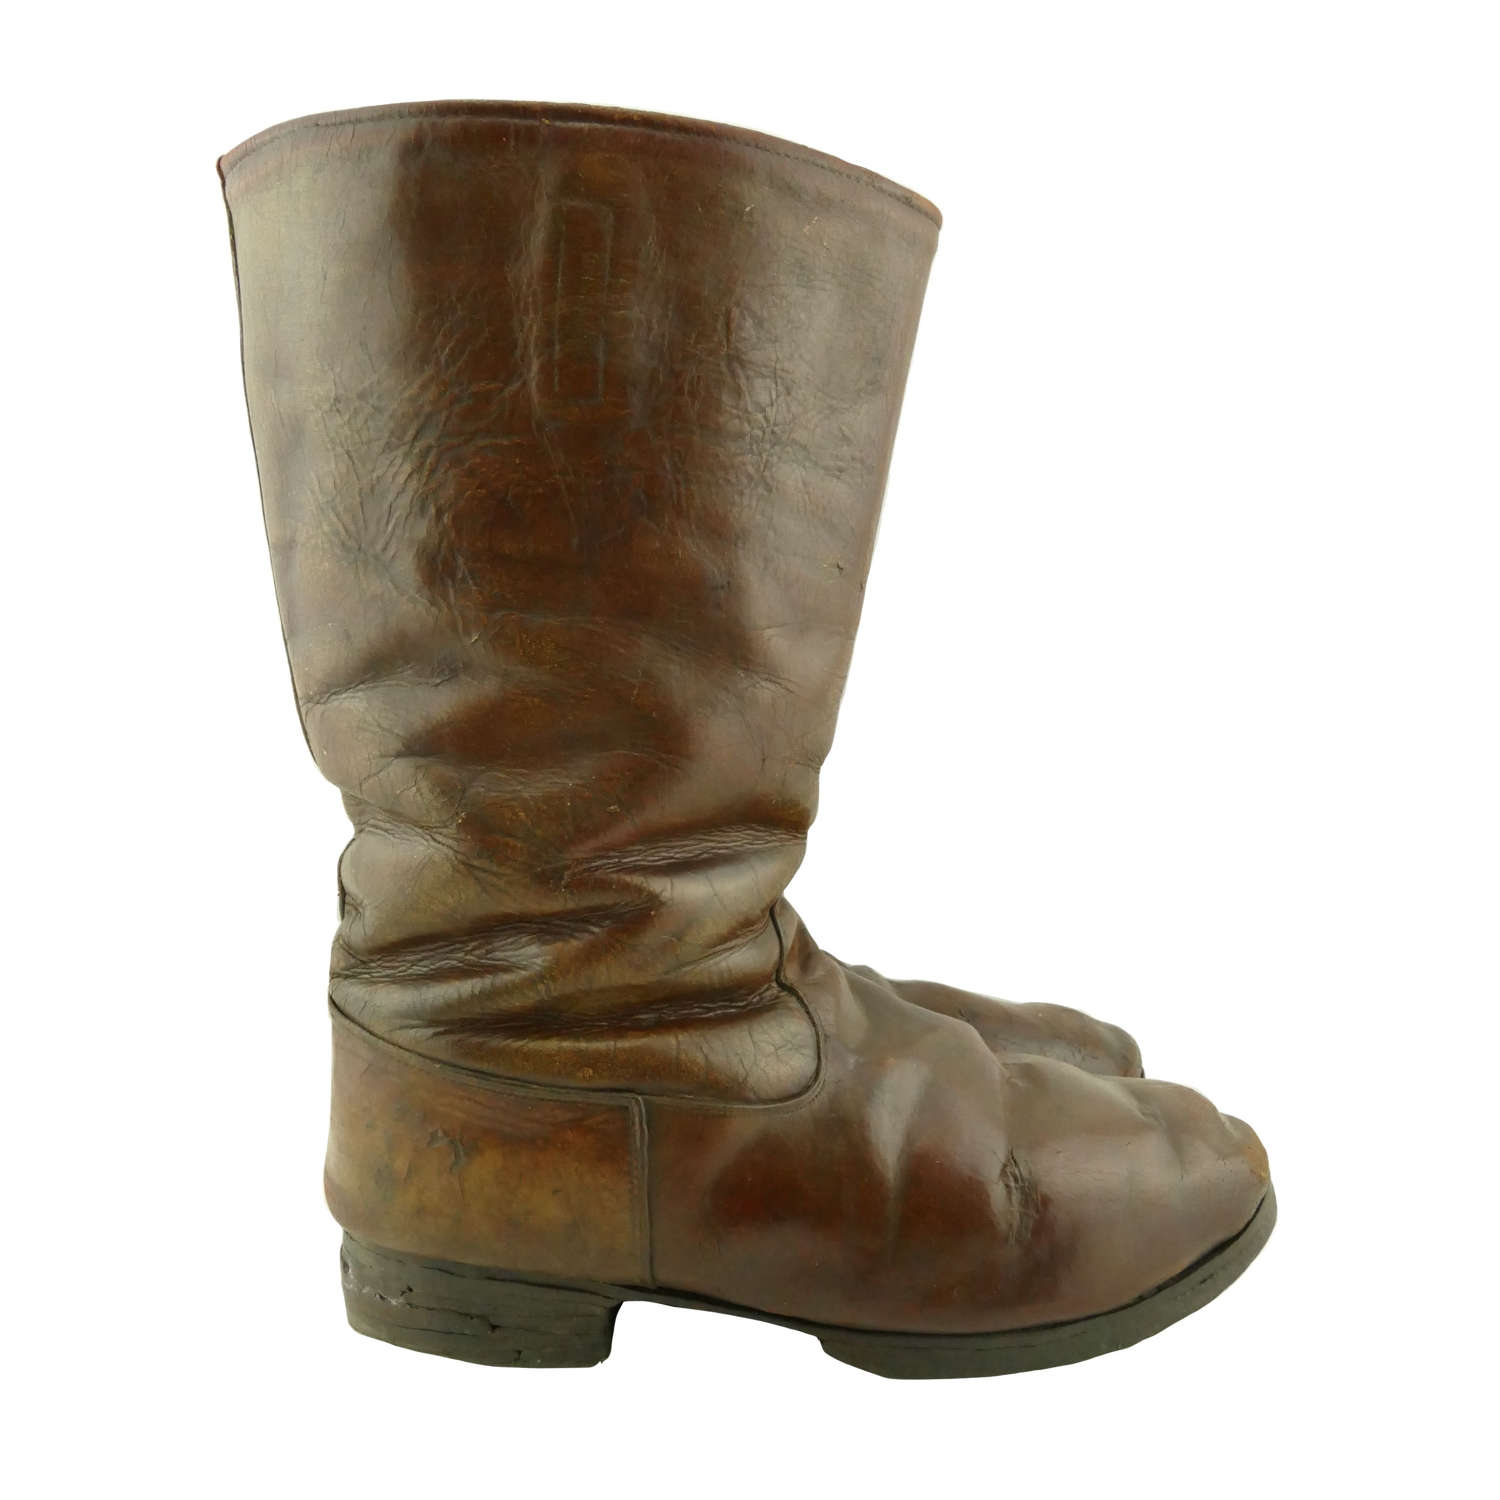 Imperial Japanese Army flying boots